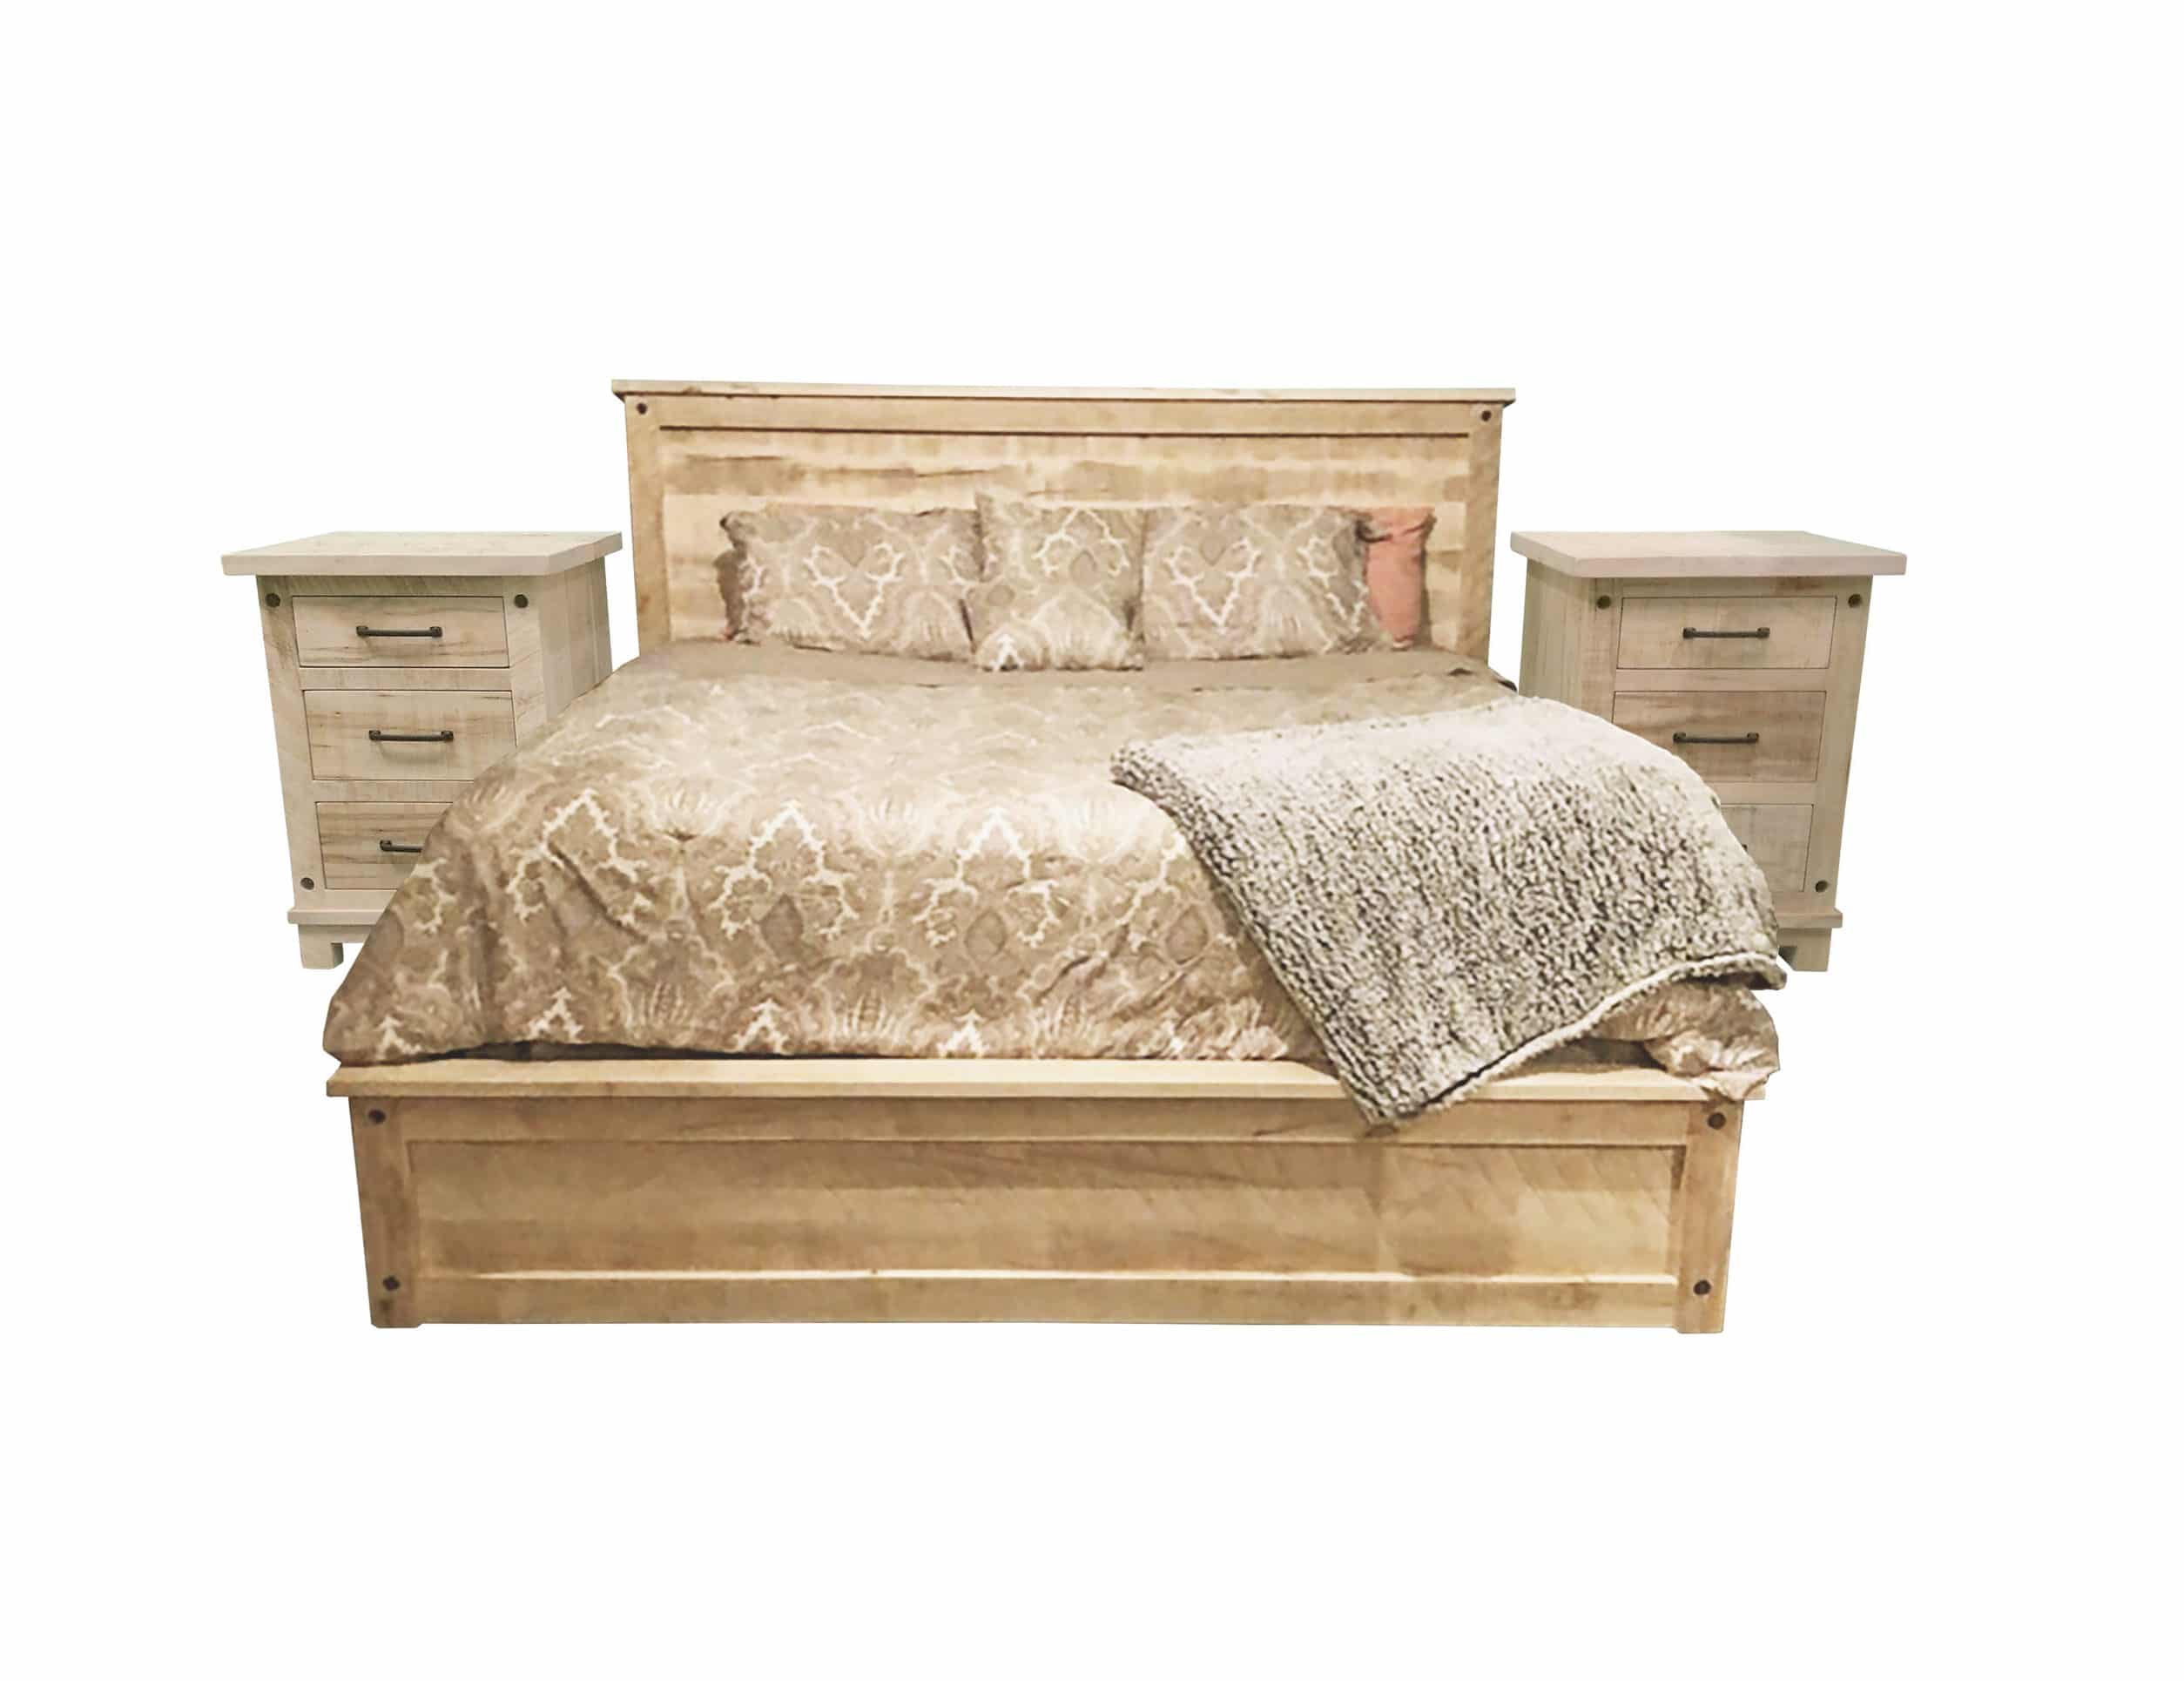 https://topnotchfurniture.com/wp-content/uploads/2020/06/Adirondack-KING-Bed-with-Night-Stands-scaled-e1593441507692.jpg